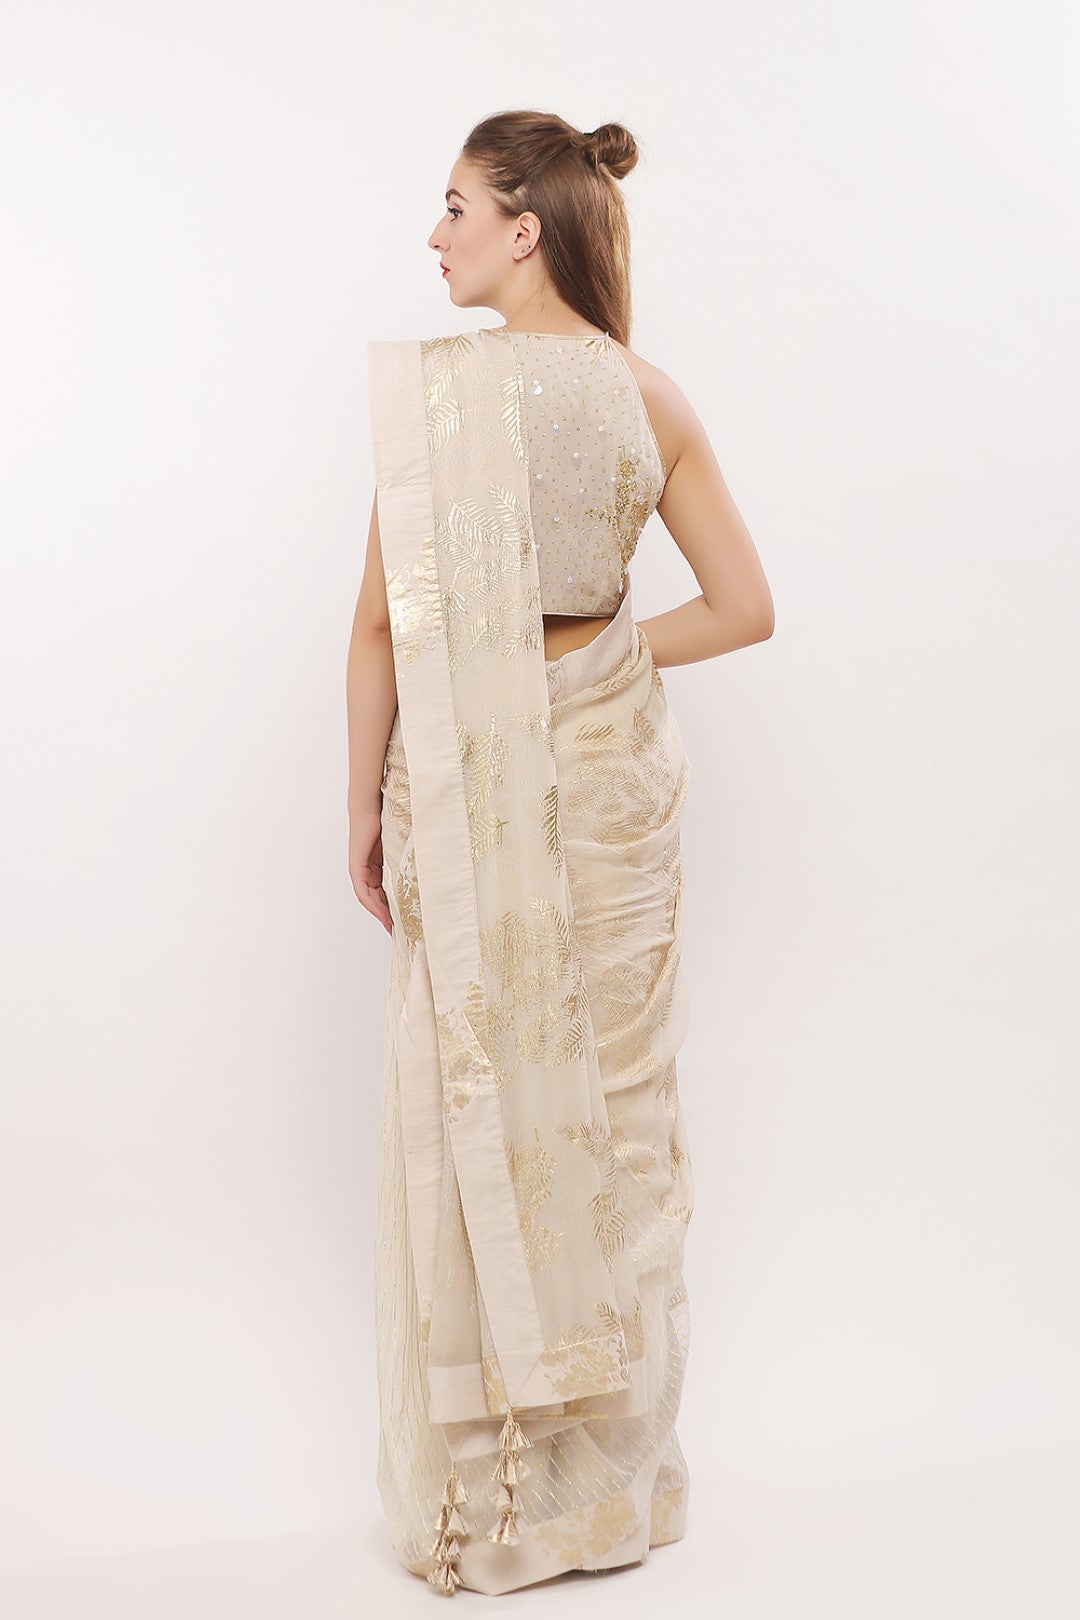 GOLD PRINTED SAREE WITH EMBROIDERED BLOUSE